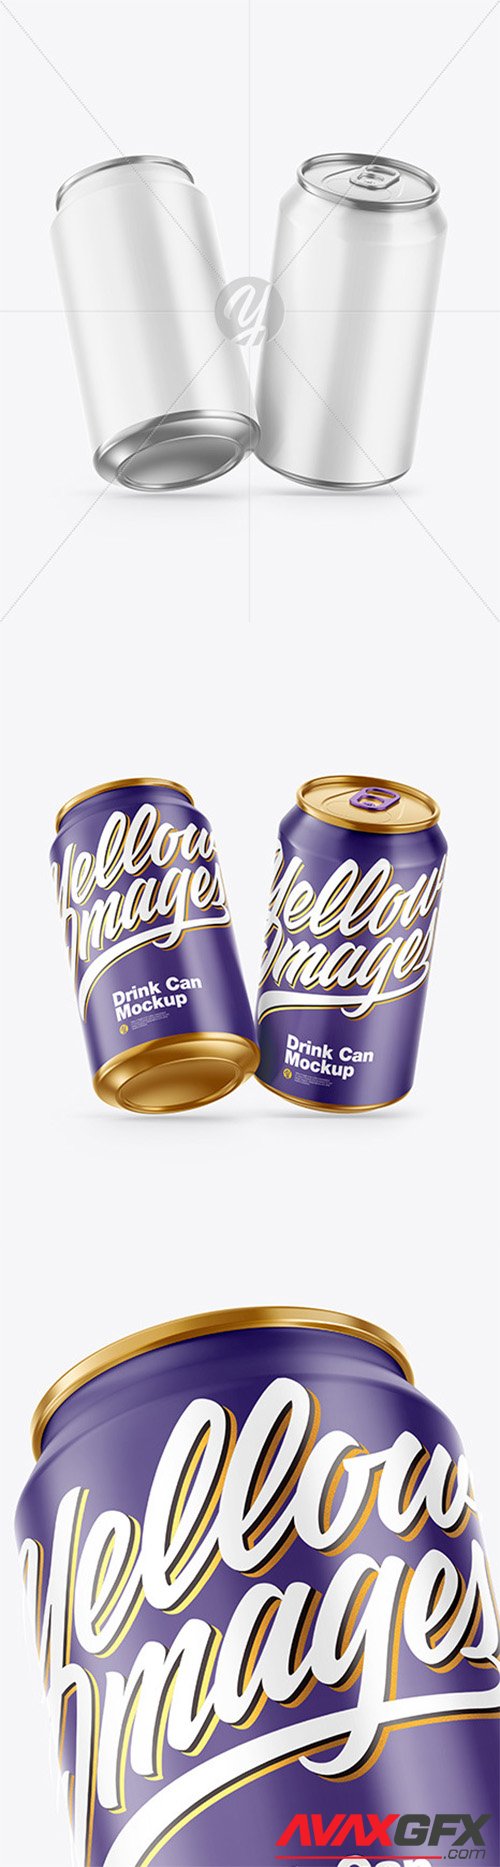 Download Psd Mockups 250ml Aluminium Can With Metallic Finish Object Mockups Yellowimages Mockups